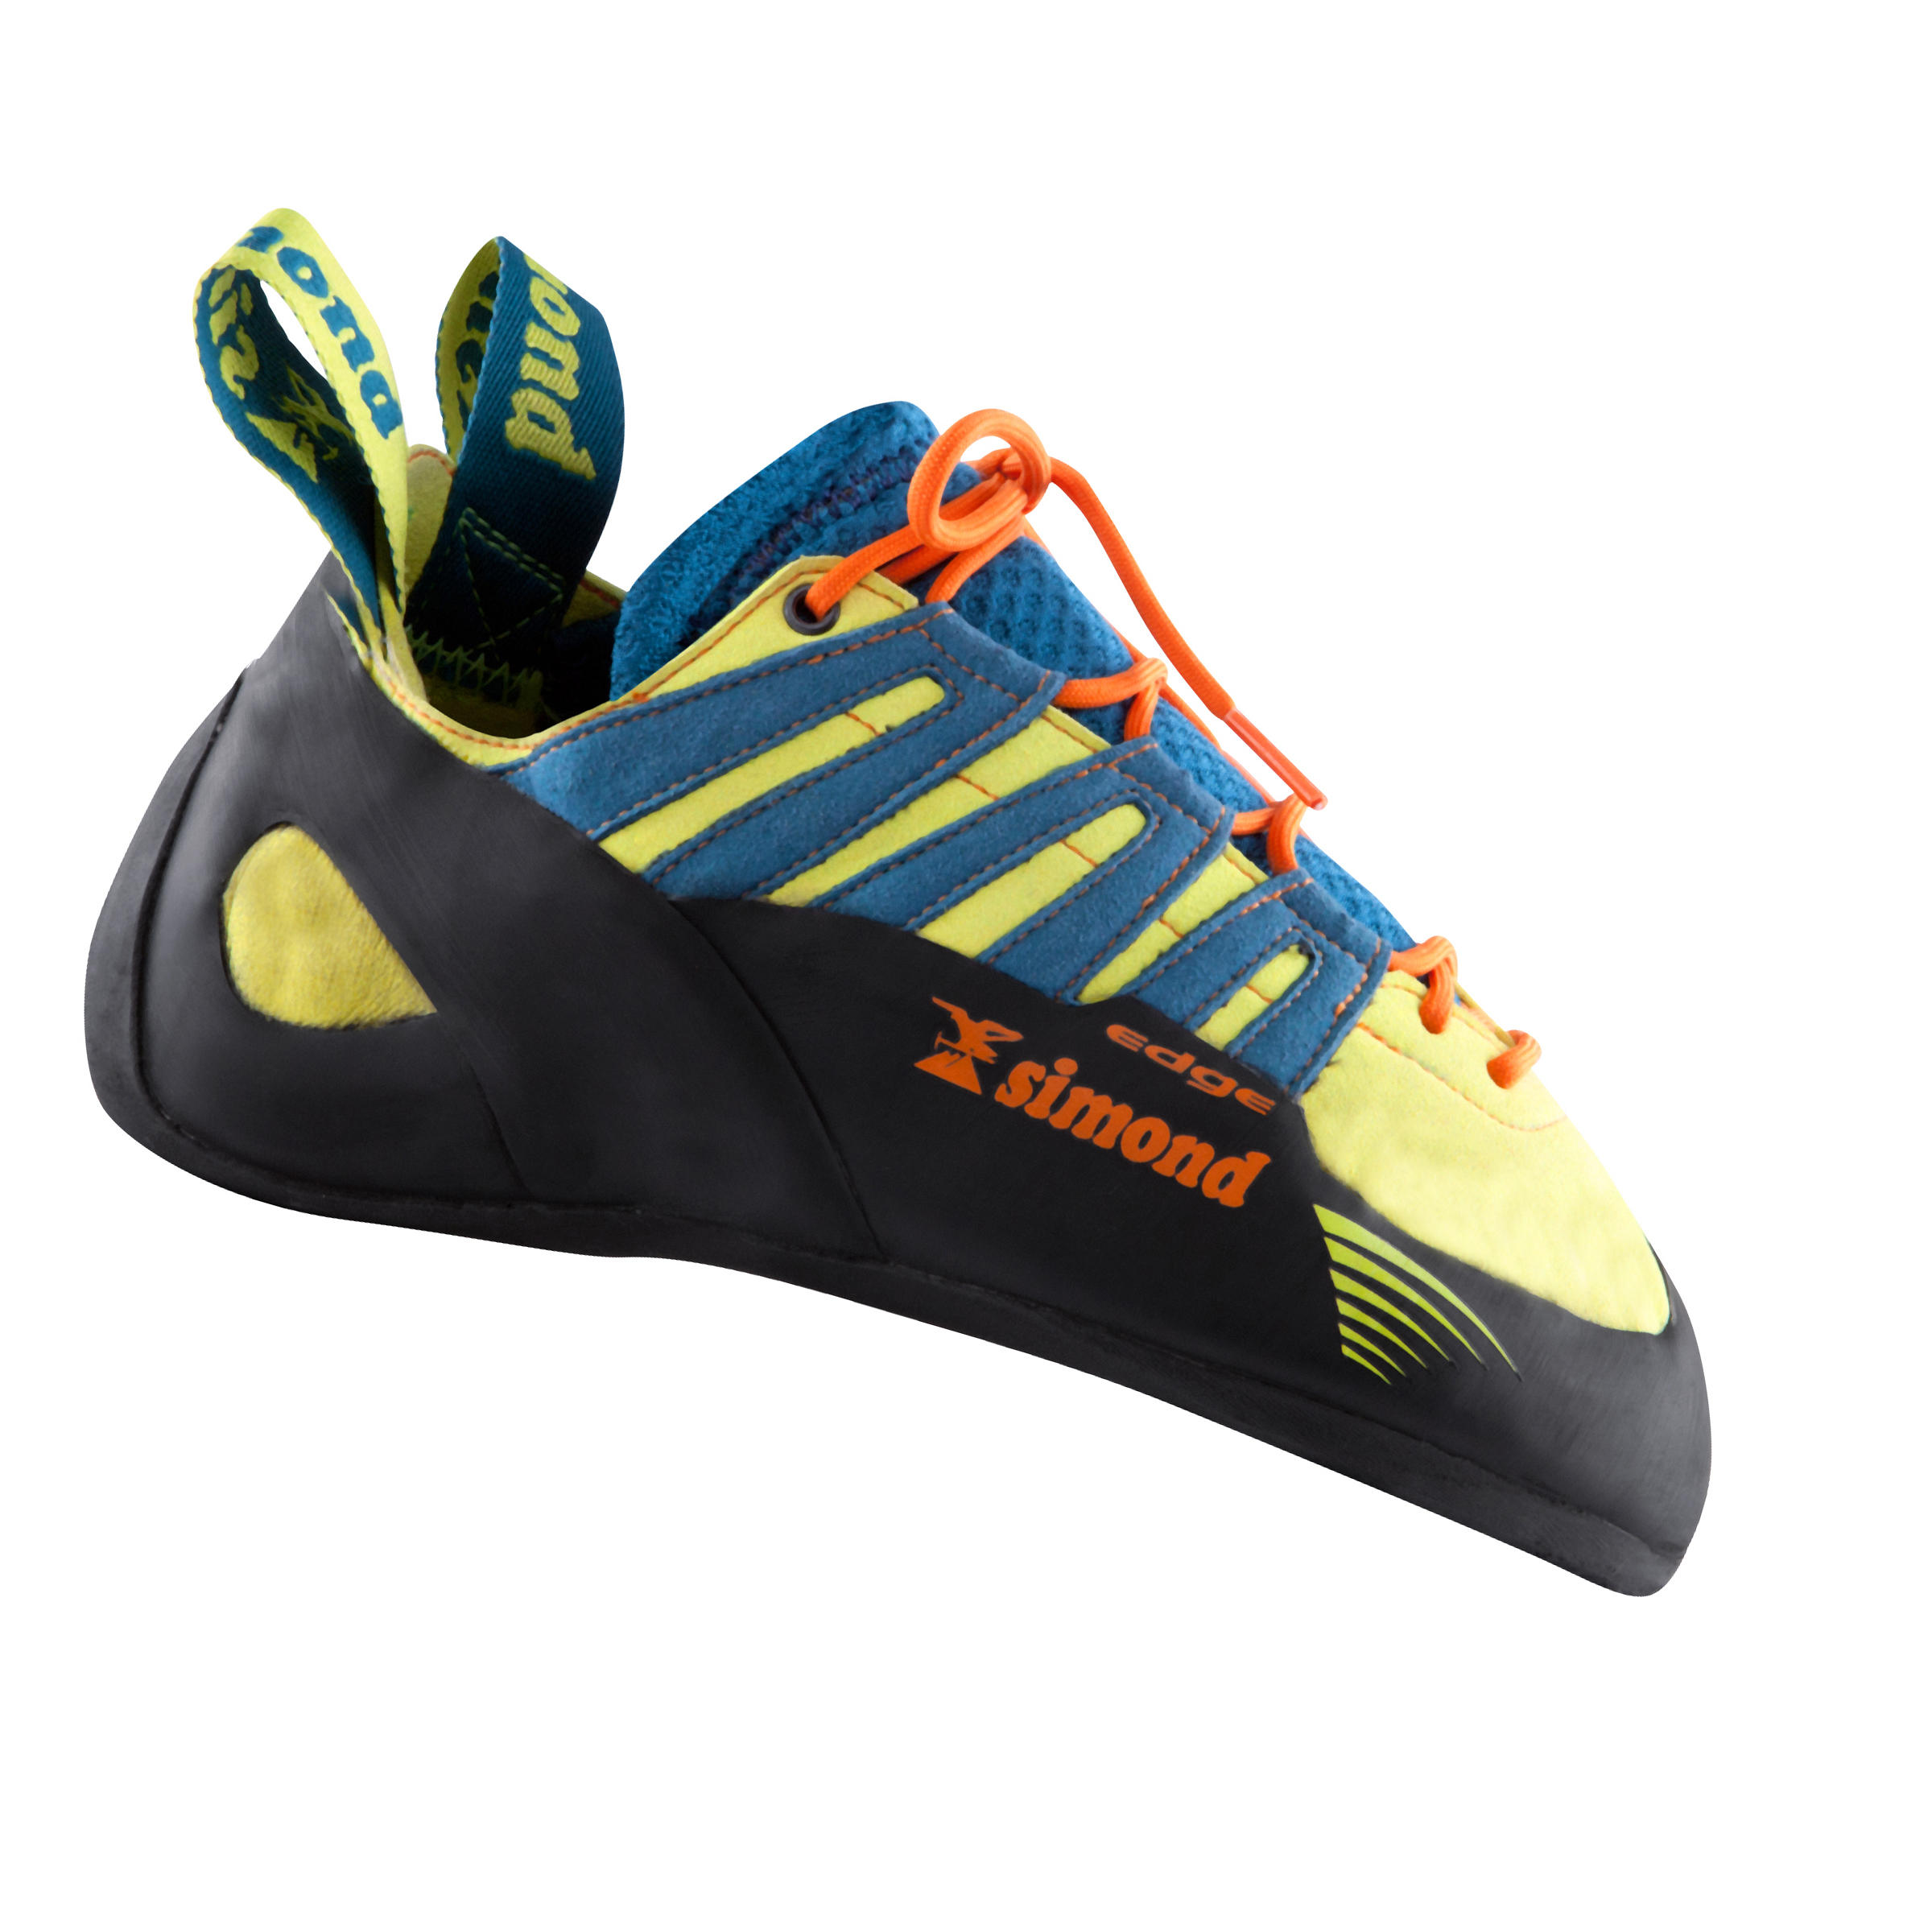 EDGE LACE-UP ADULT CLIMBING SHOES 1/14